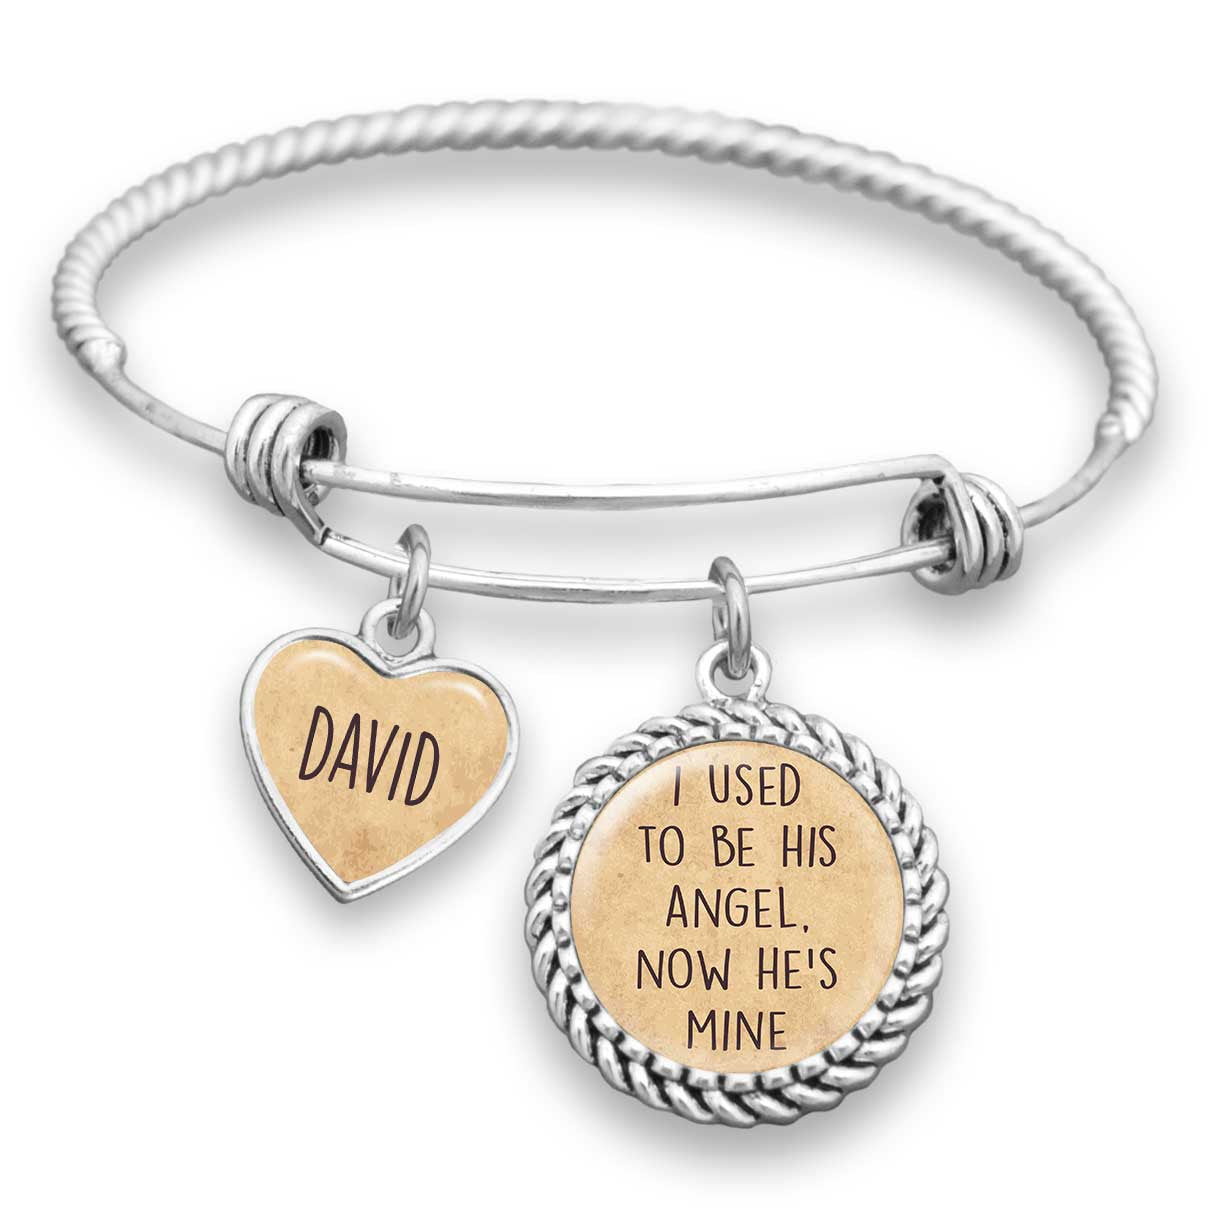 Personalized I Used To Be His Angel, Now He's Mine Bracelet